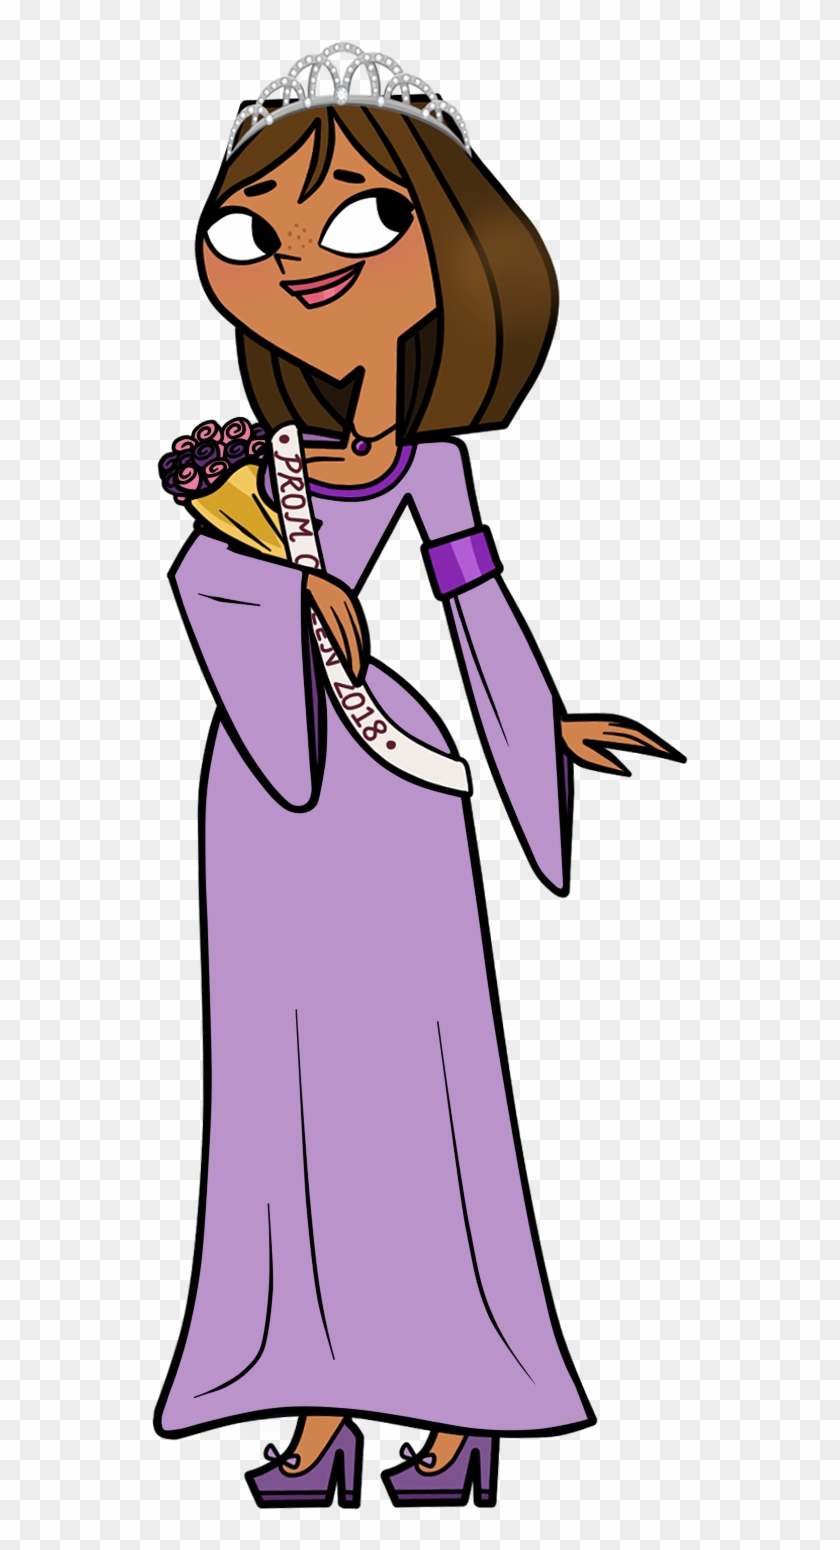 Courtney The Prom Queen By Evaheartsart Courtney The - Art #636739